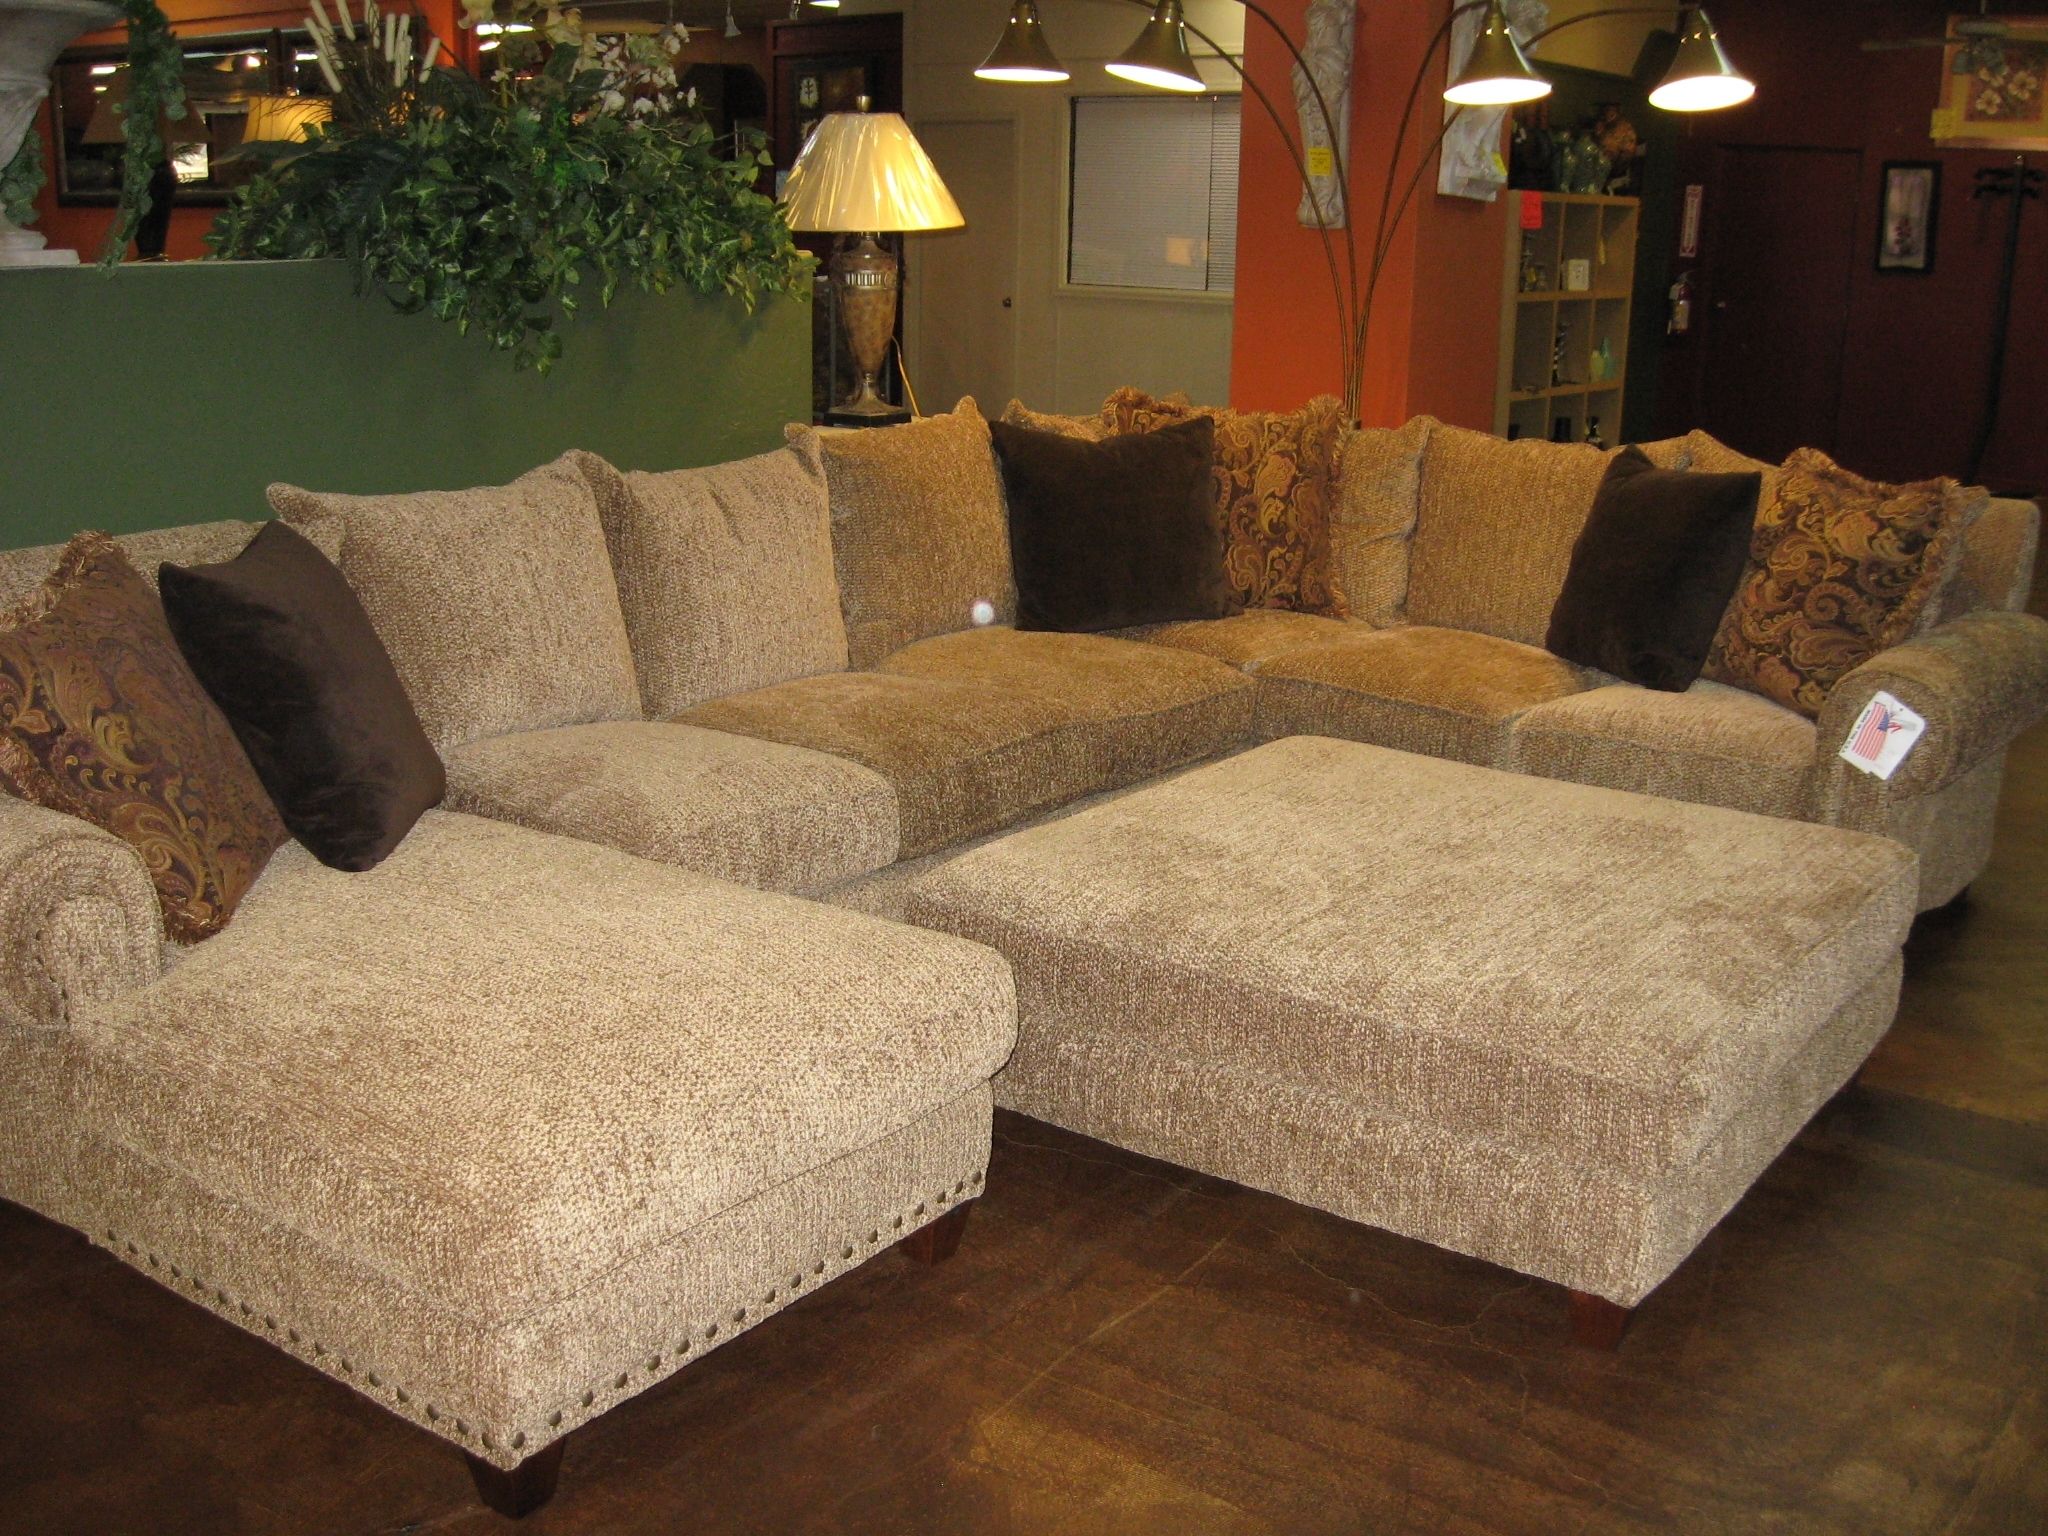 Glamorous Sectional Sofa With Chaise And Ottoman 79 In Sectional Pertaining To Sectional Sofas With Chaise And Ottoman (View 2 of 15)